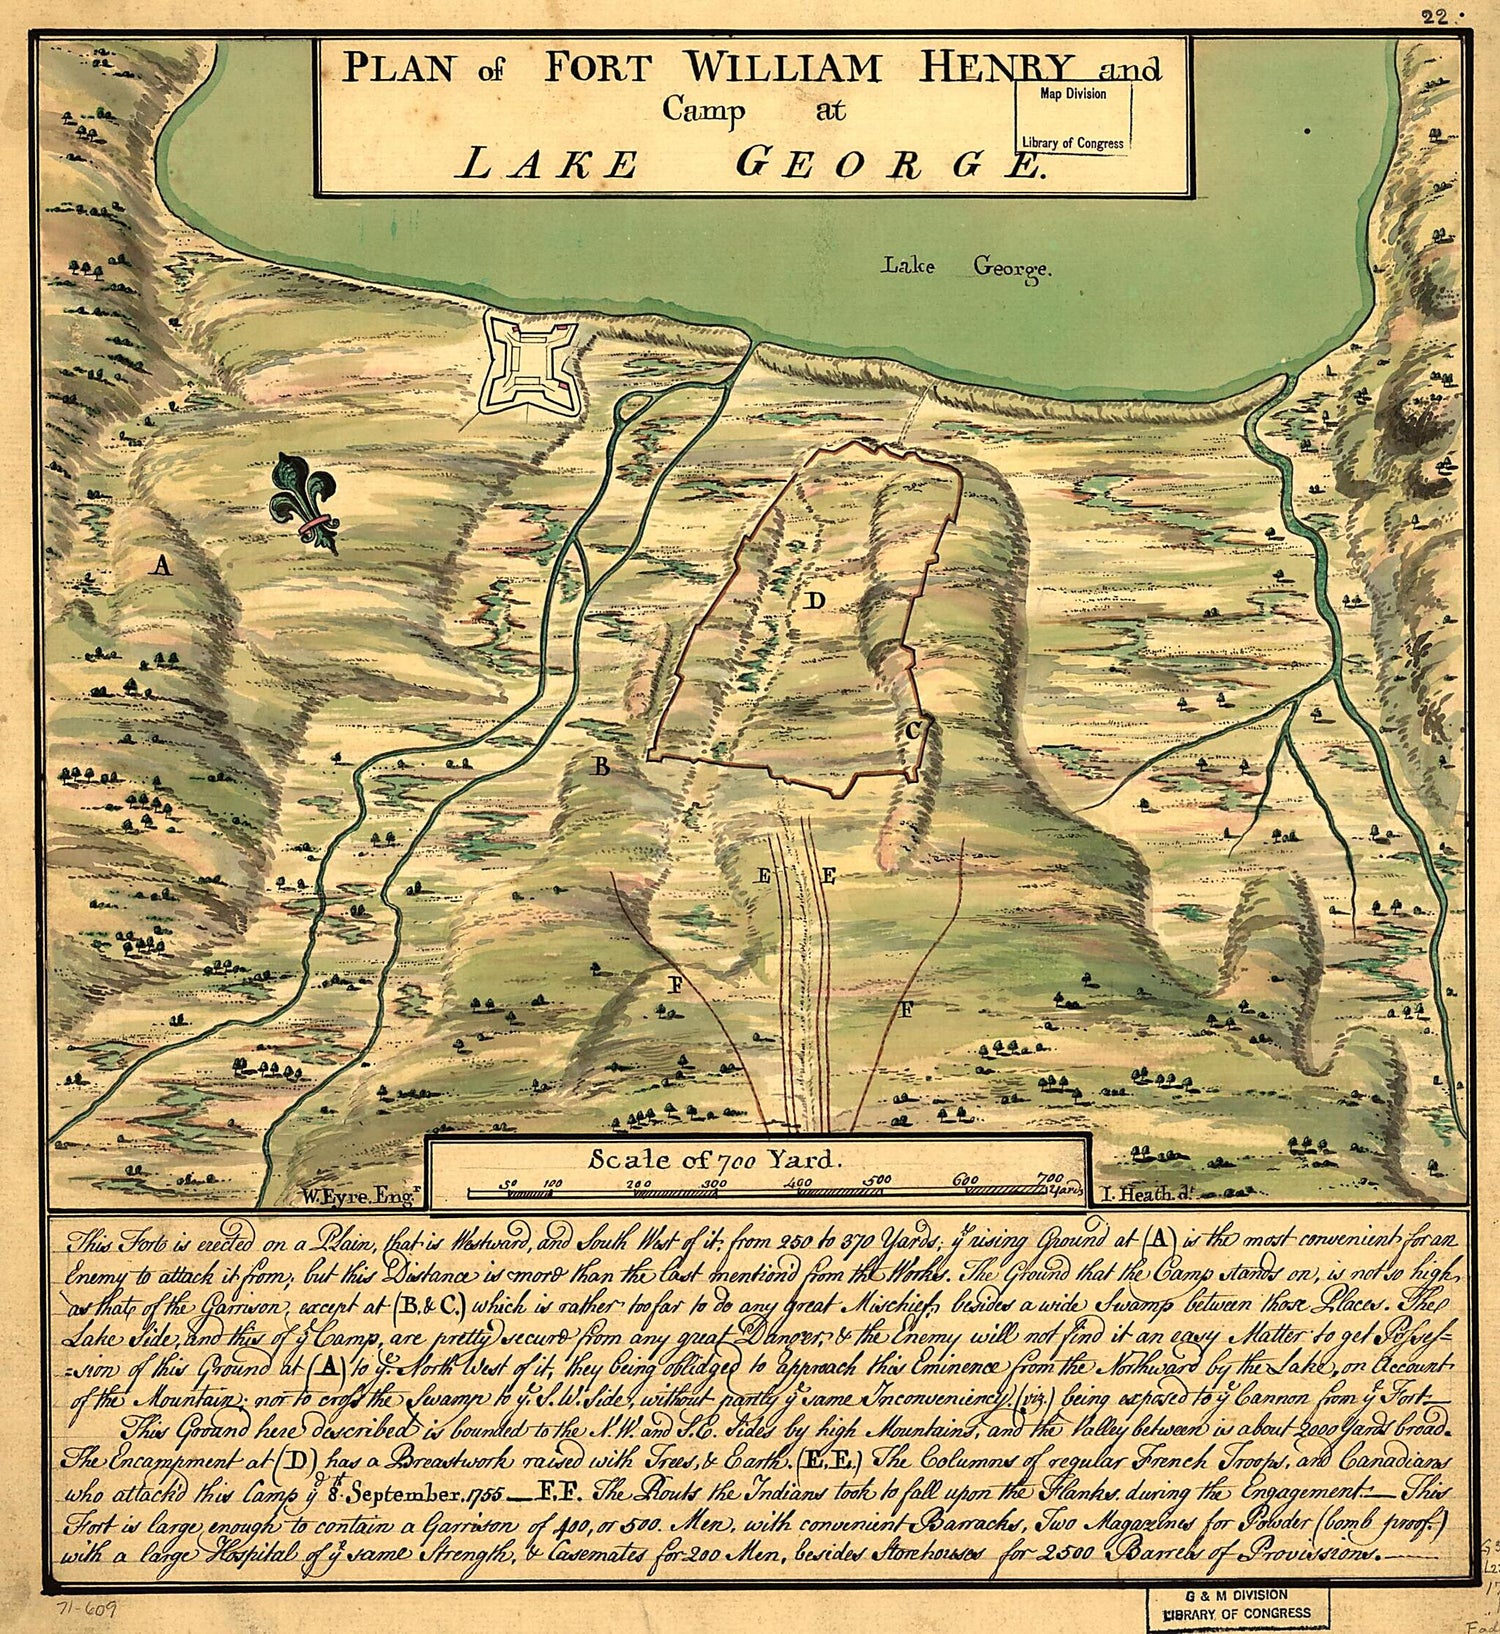 This old map of Plan of Fort William Henry and Camp at Lake George from 1755 was created by William Eyre, Joseph Heath in 1755